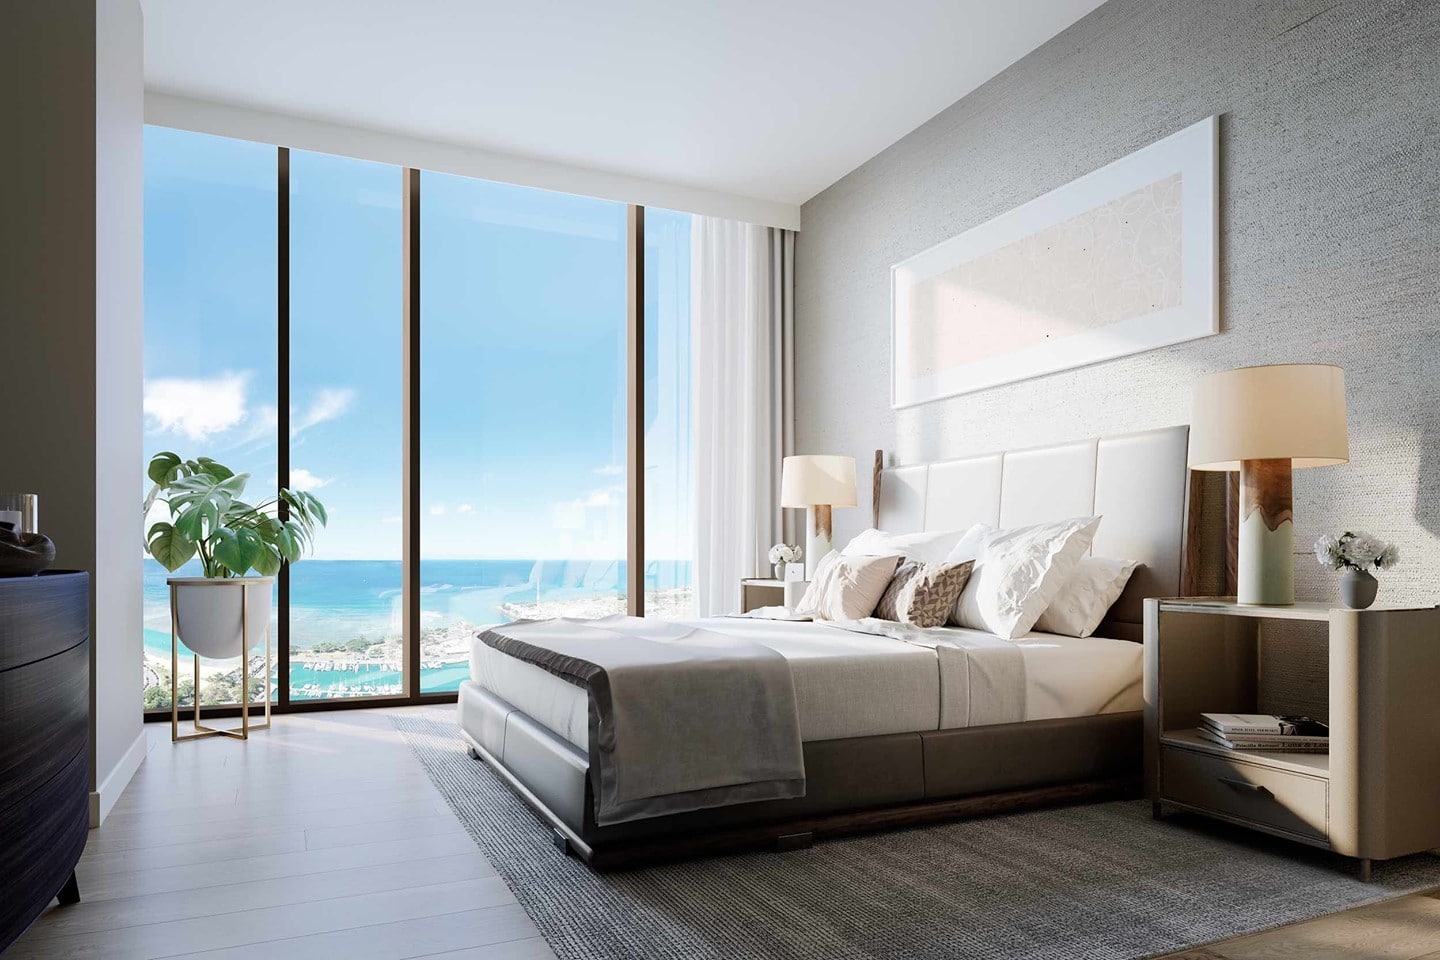 Wake up to stunning views of Oahu’s South Shore at Victoria Place. Thanks to its front row location on Ala Moana Blvd., the beauty of the island is always on display.